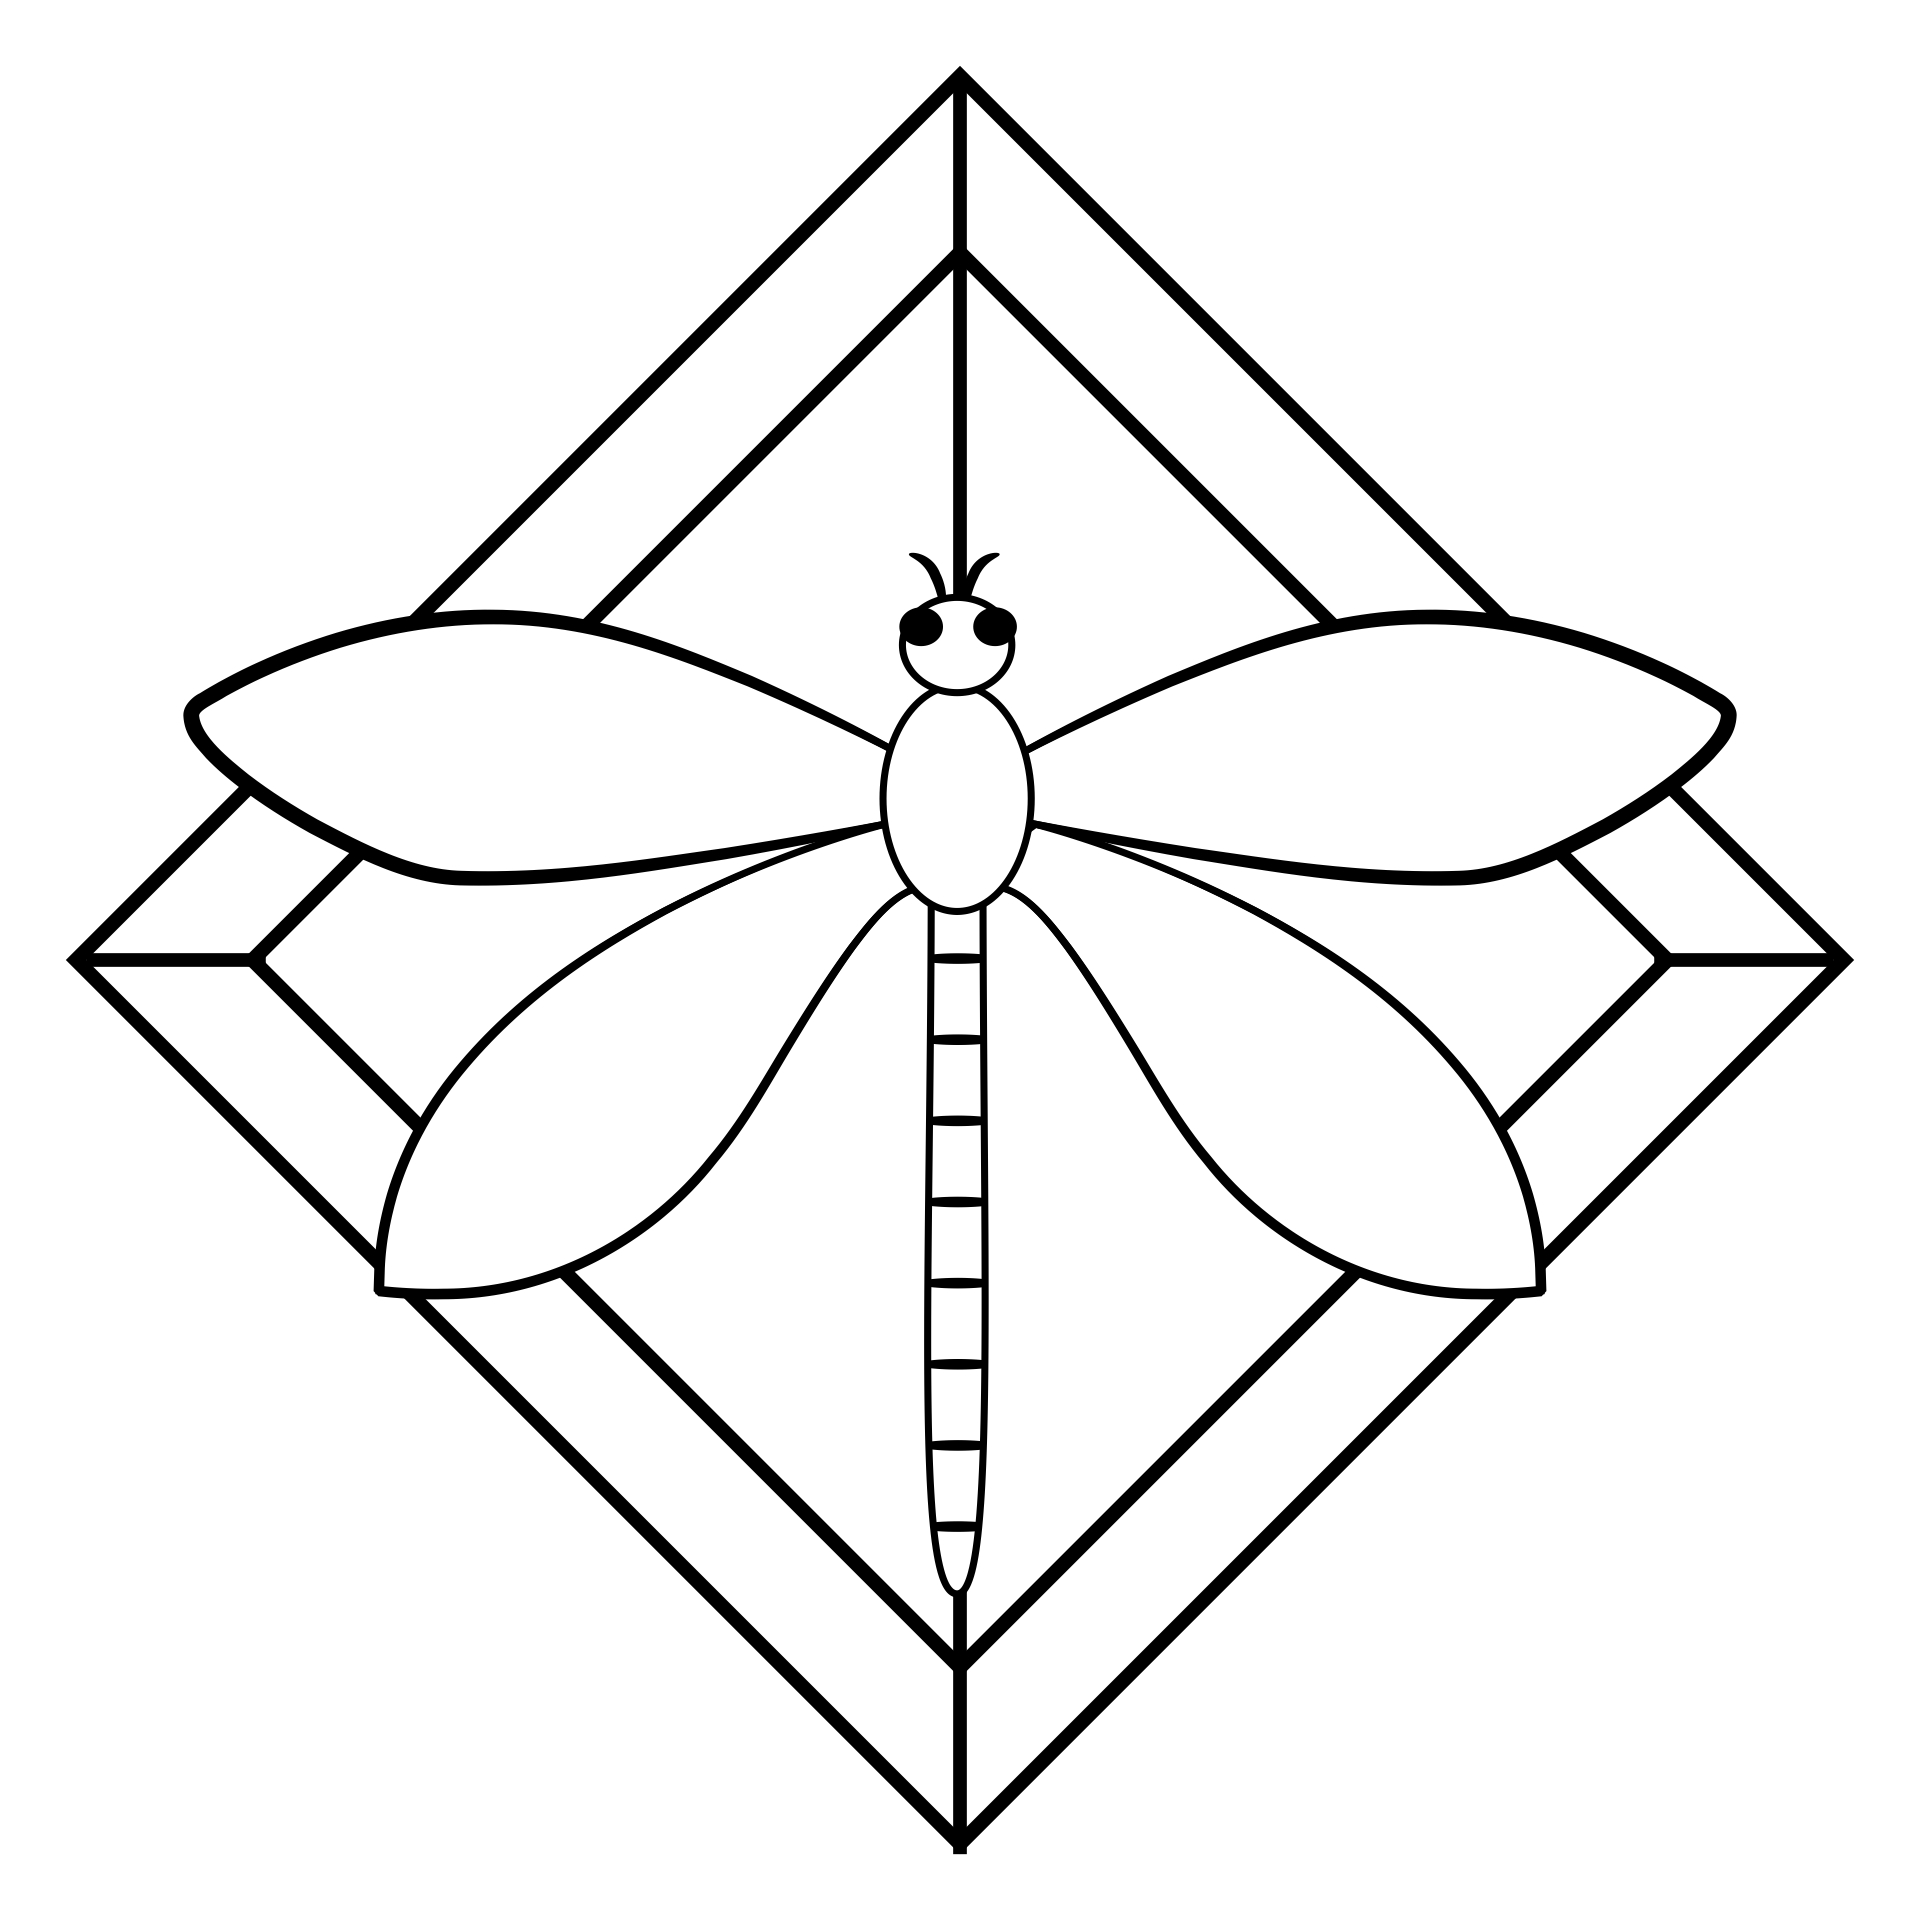 Printable Dragonfly Stained Glass Quilt Pattern